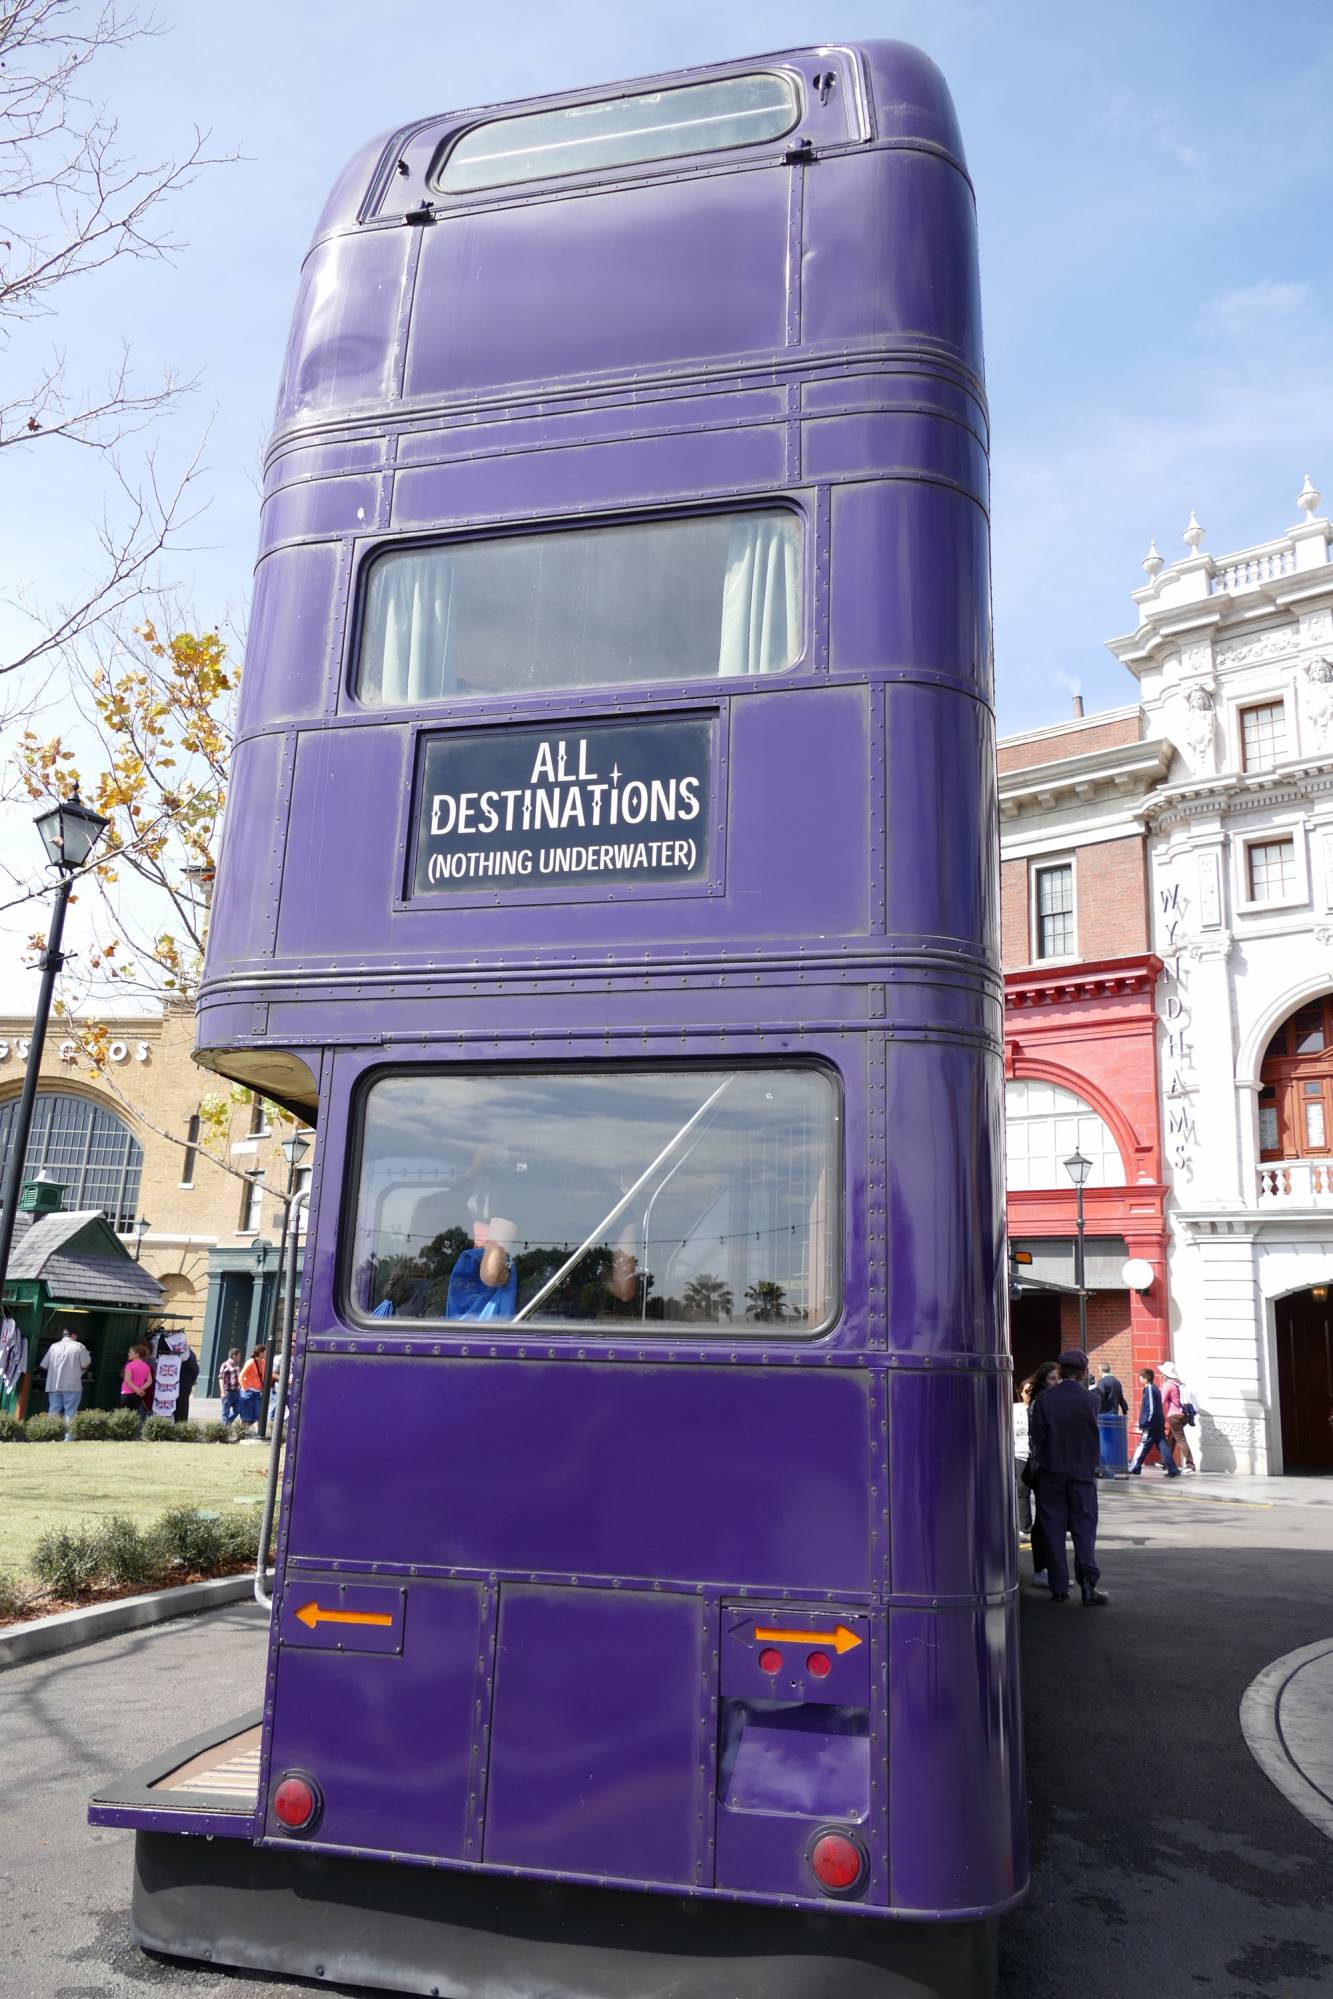 The Knight Bus - Wizarding World of Harry Potter at Universal Studios Flori